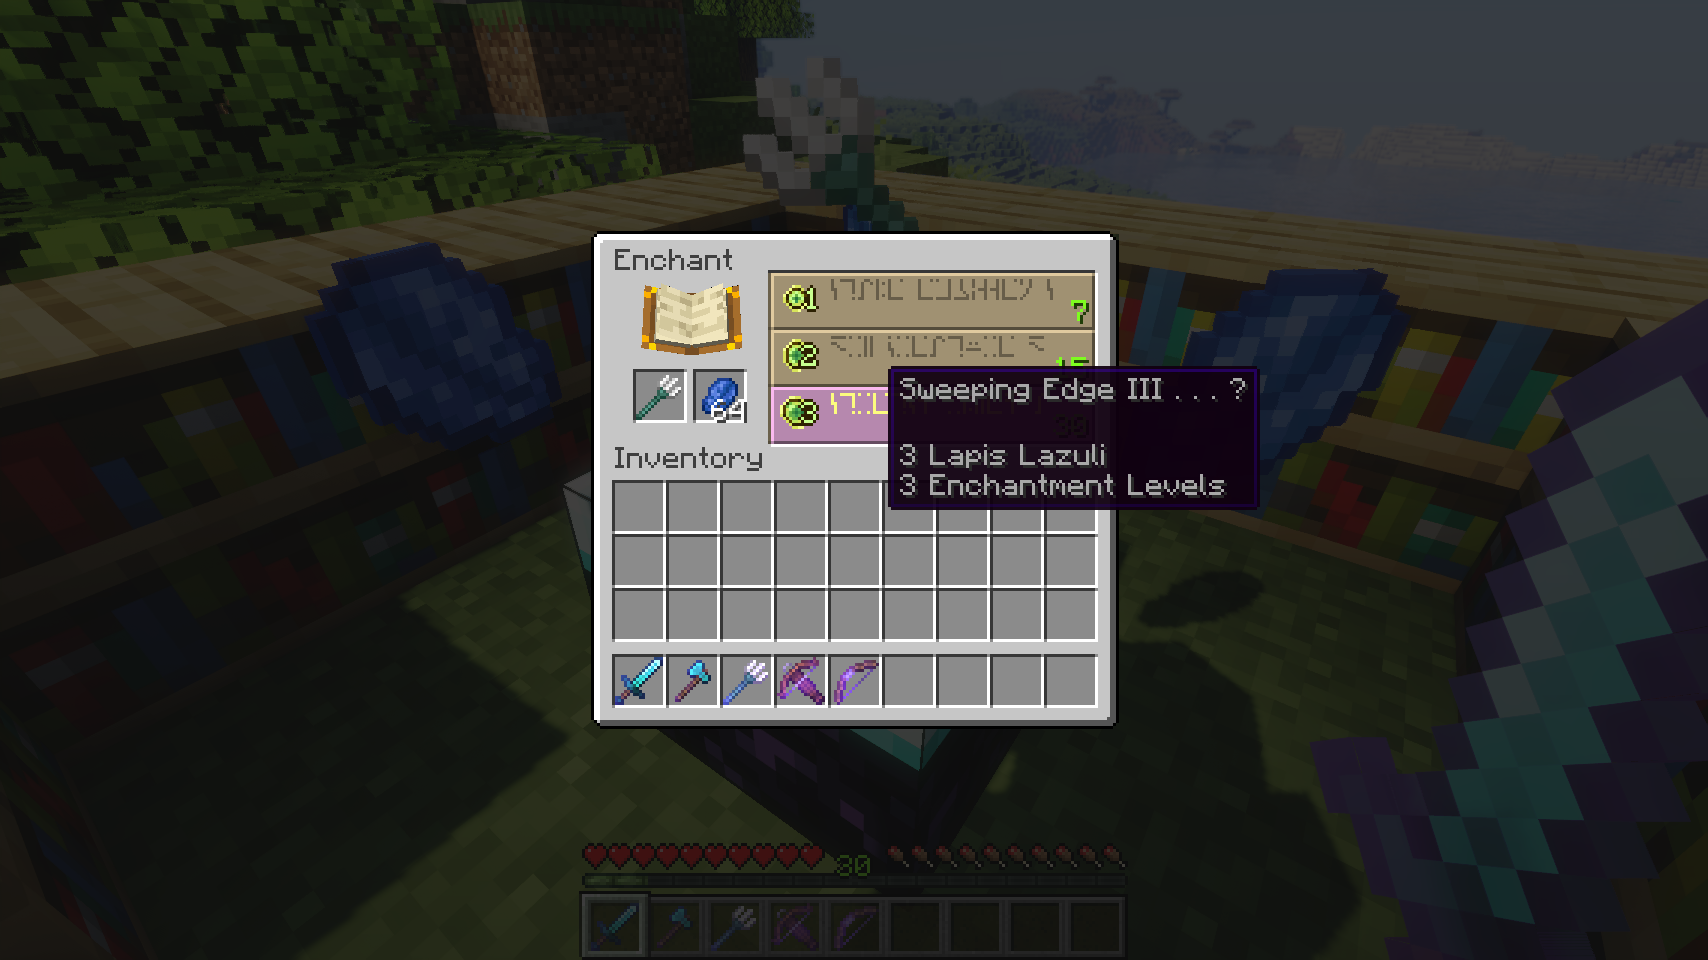 EnchantmentRevealer v1.1 - Reveals all enchantments in the enchantment GUI,  even in vanilla SMP! - Minecraft Mods - Mapping and Modding: Java Edition -  Minecraft Forum - Minecraft Forum